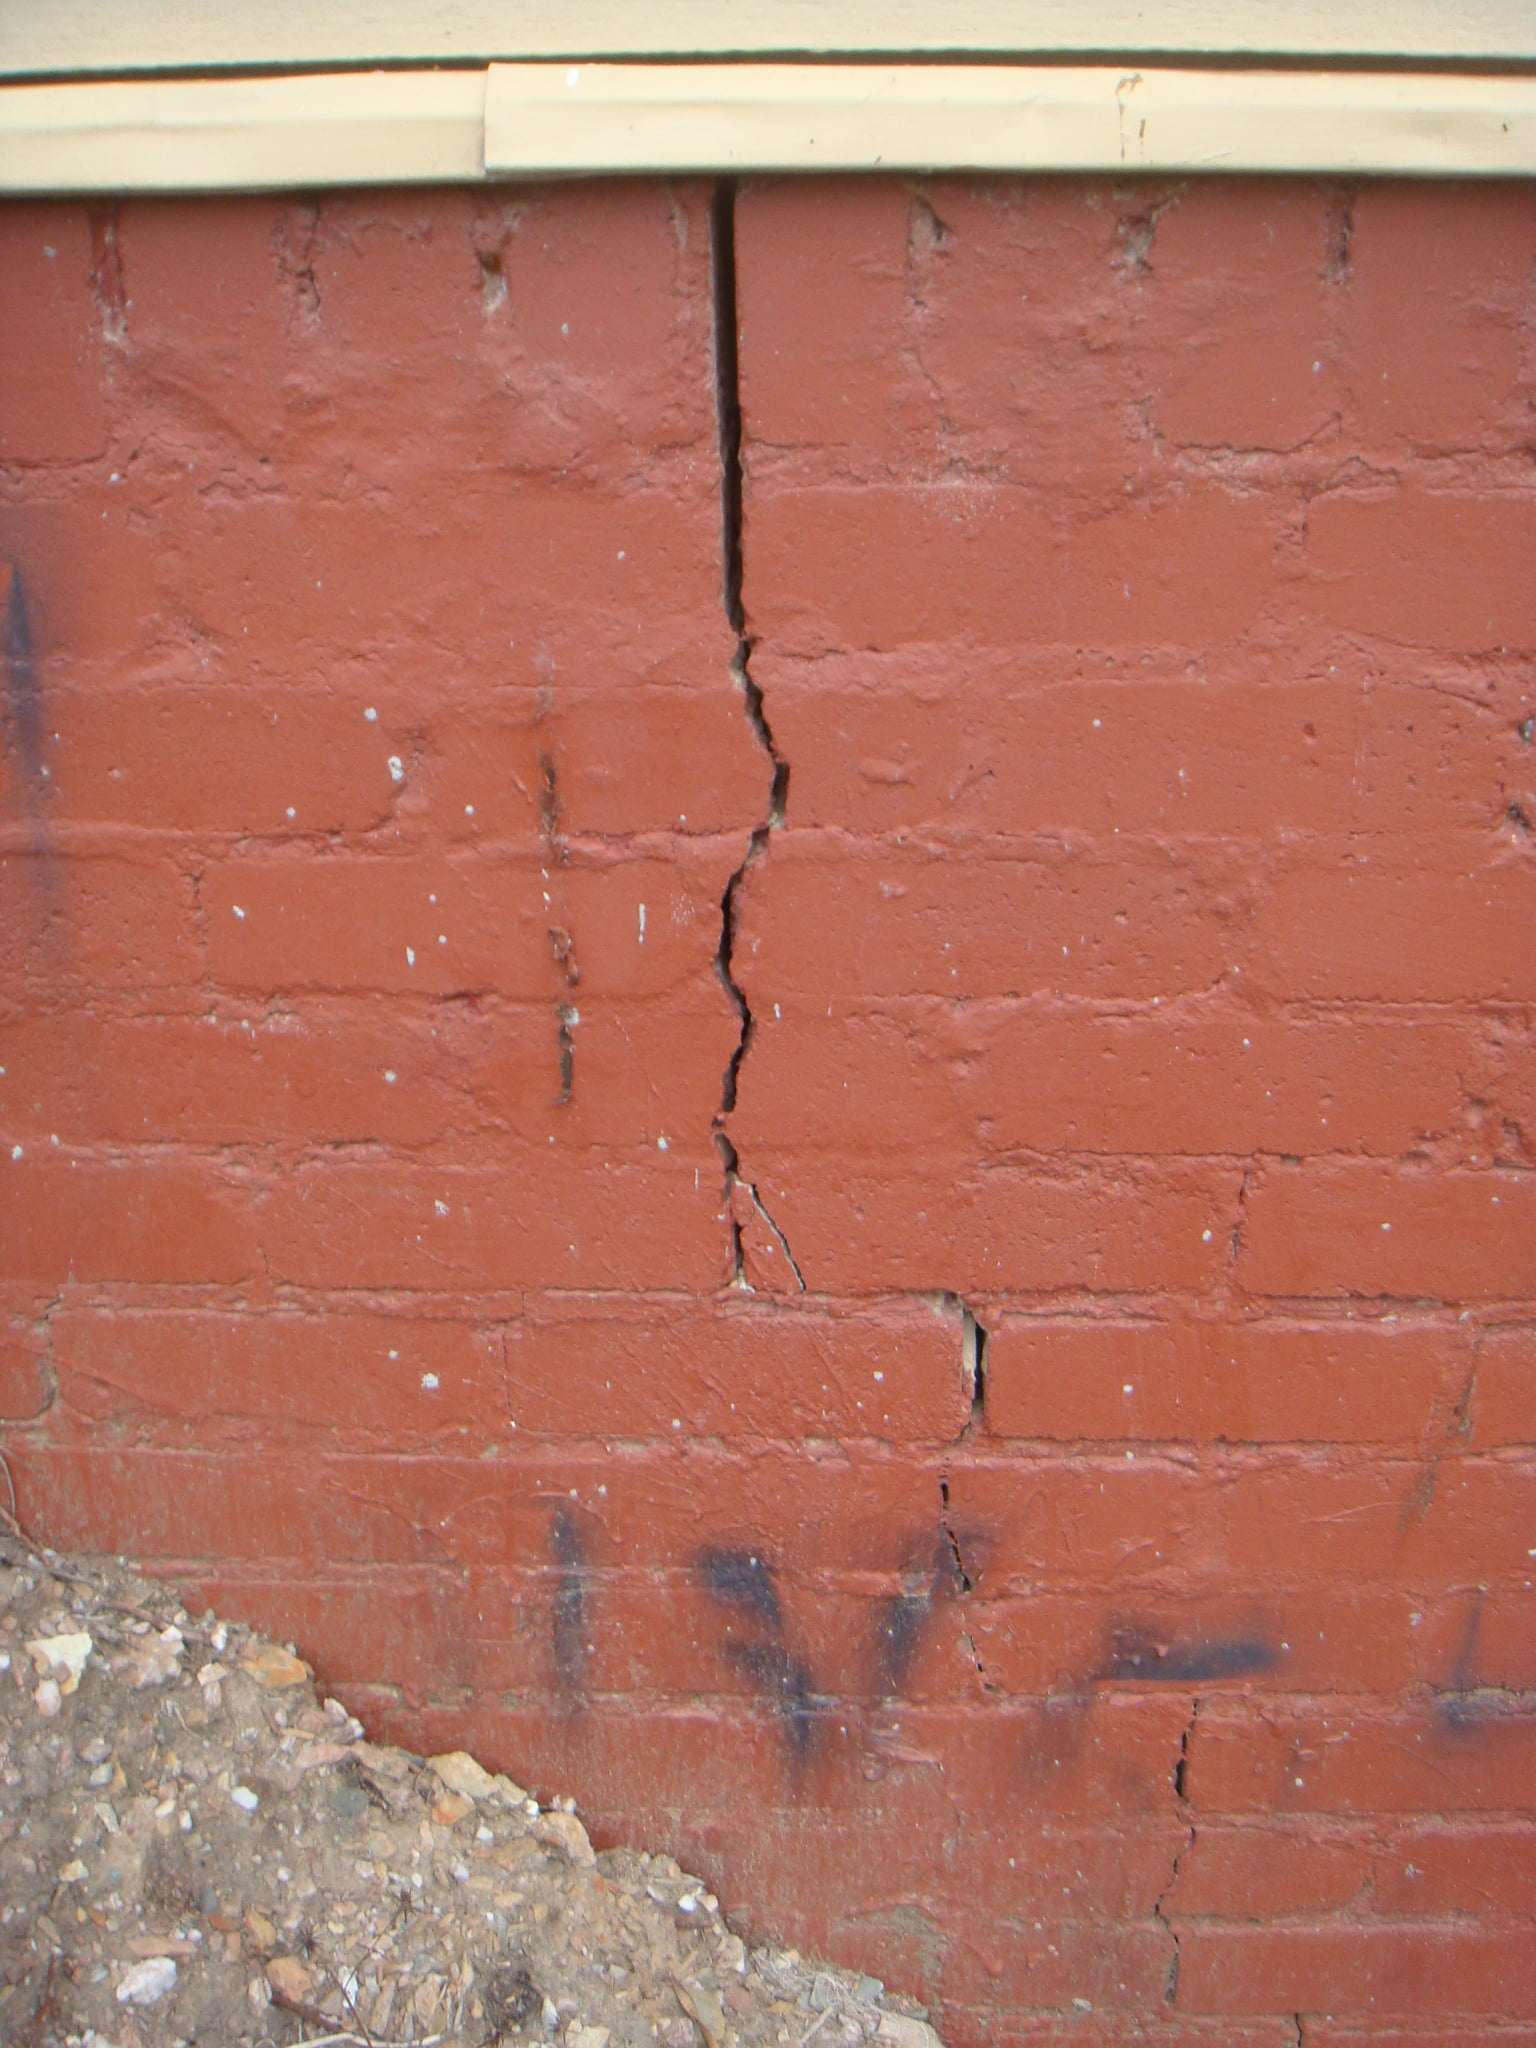 Cracks in Walls - What Causes Them And How Do We Fix It?